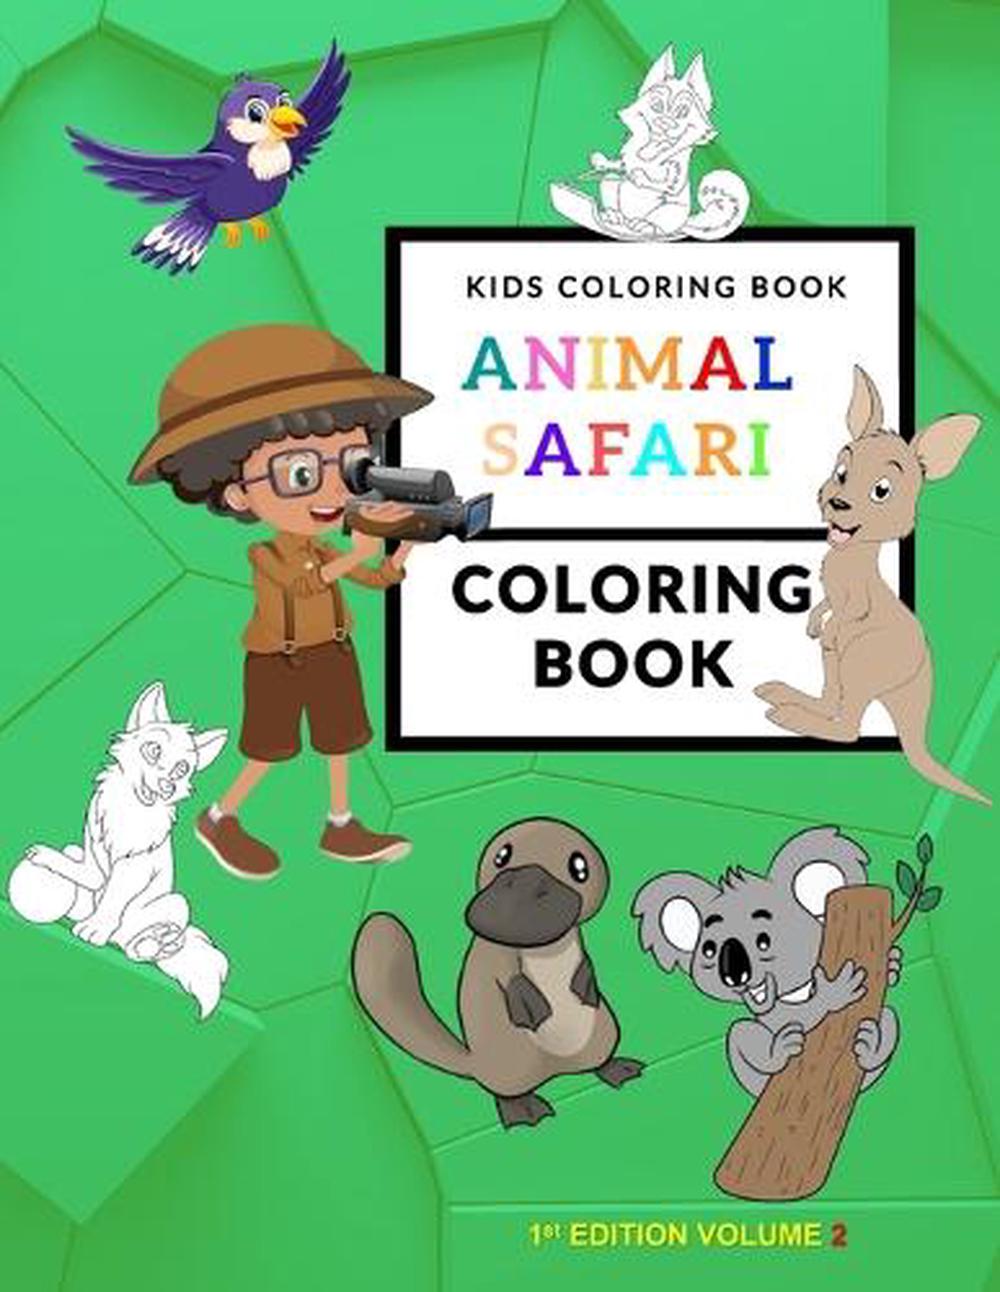 Animal Coloring Books for Kids Ages 8-12: 50 Fun Animals to Color Relaxing  for Pre-School (Paperback)